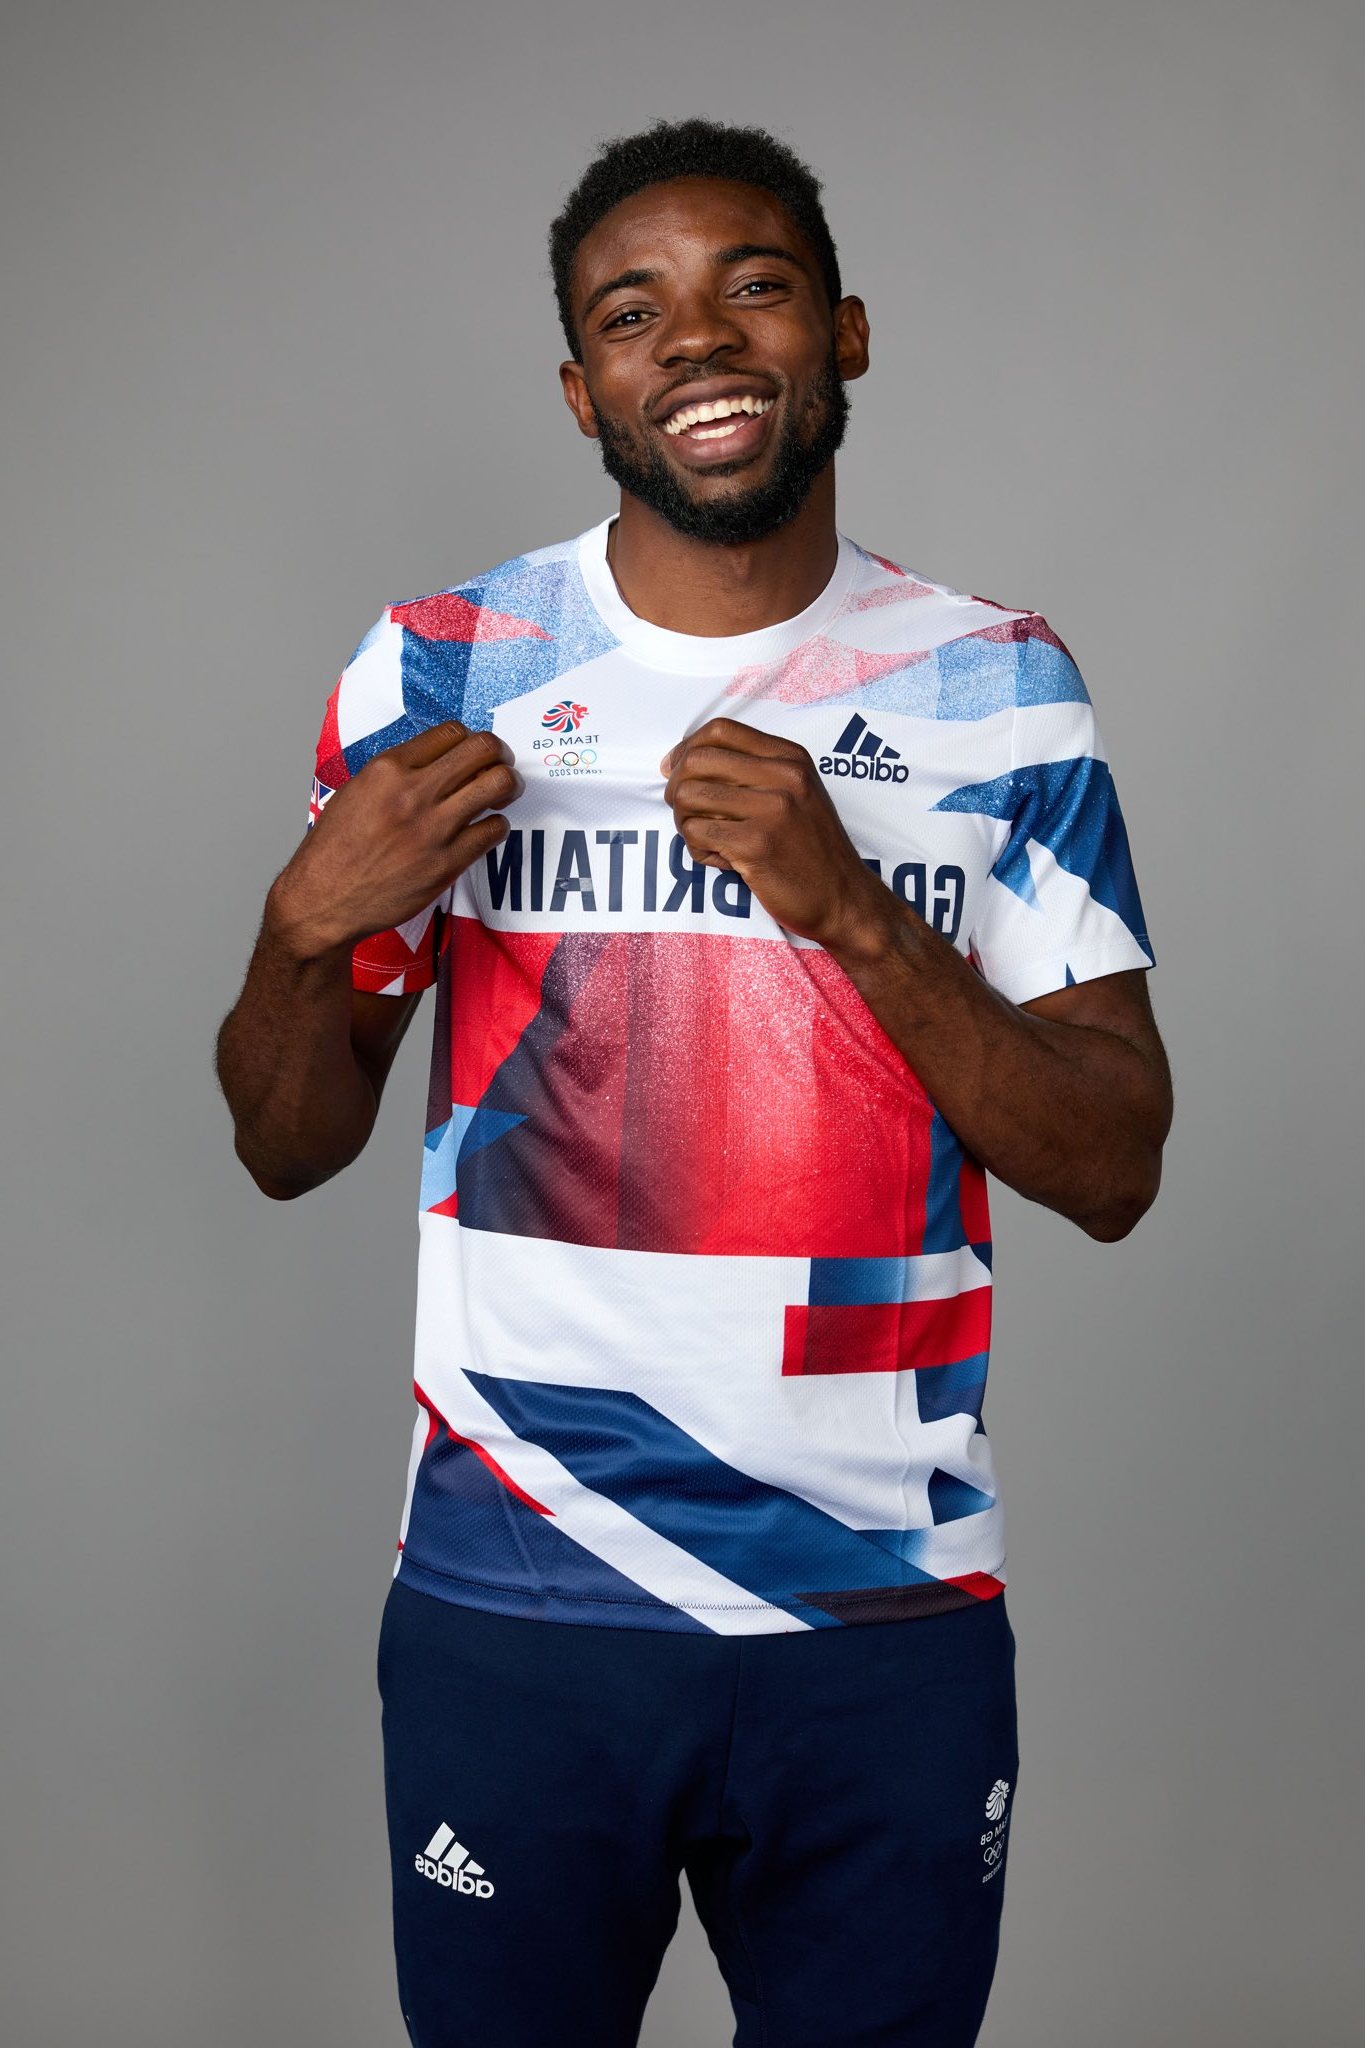 Photo of Michael Ohioze in Great Britain Olympic jersey